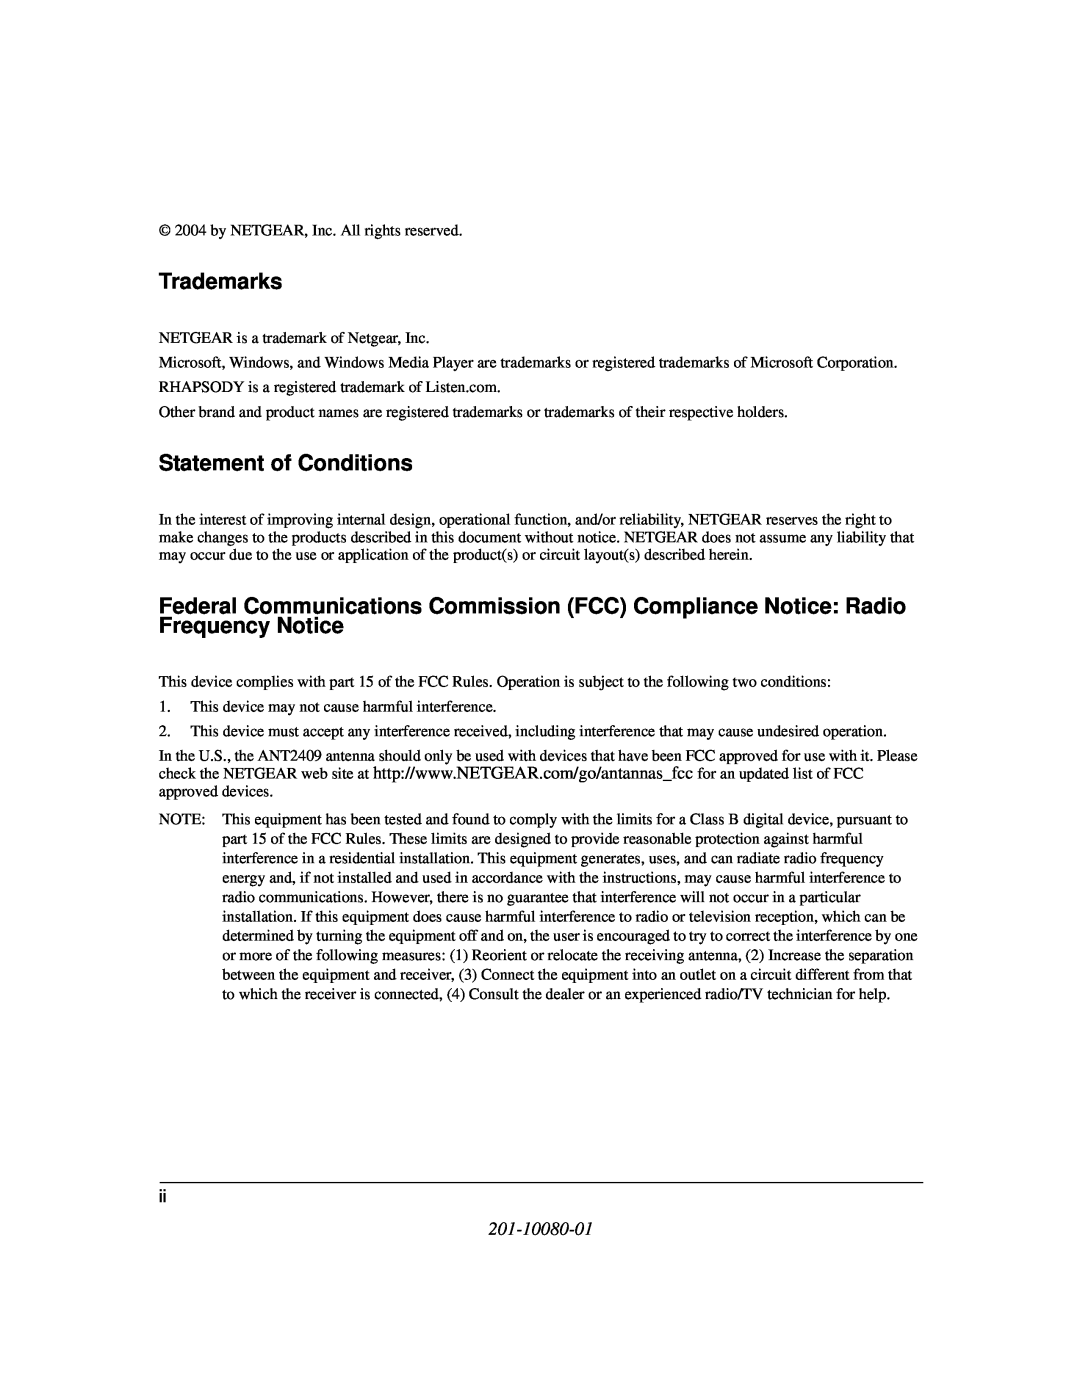 NETGEAR 2409 manual Trademarks, Statement of Conditions, 201-10080-01 